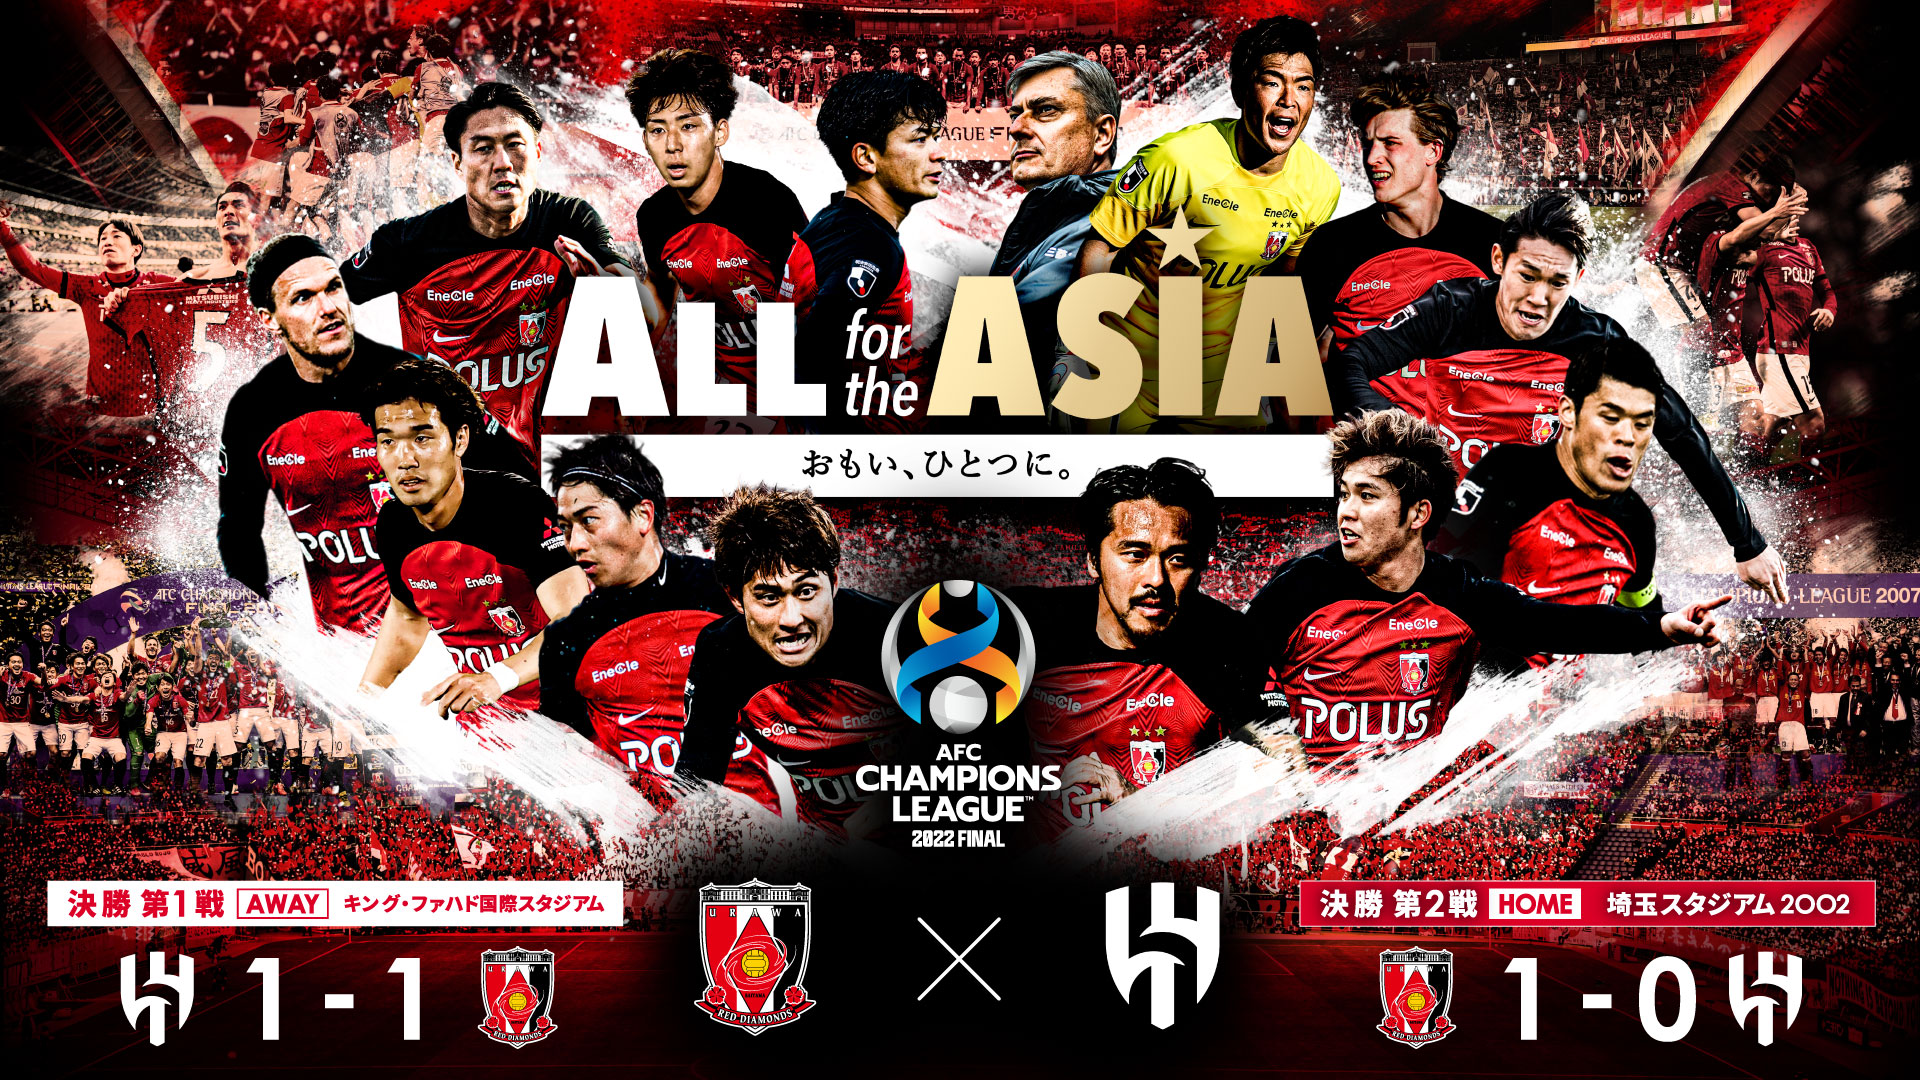 ALL for the ASIA おもい、ひとつに。